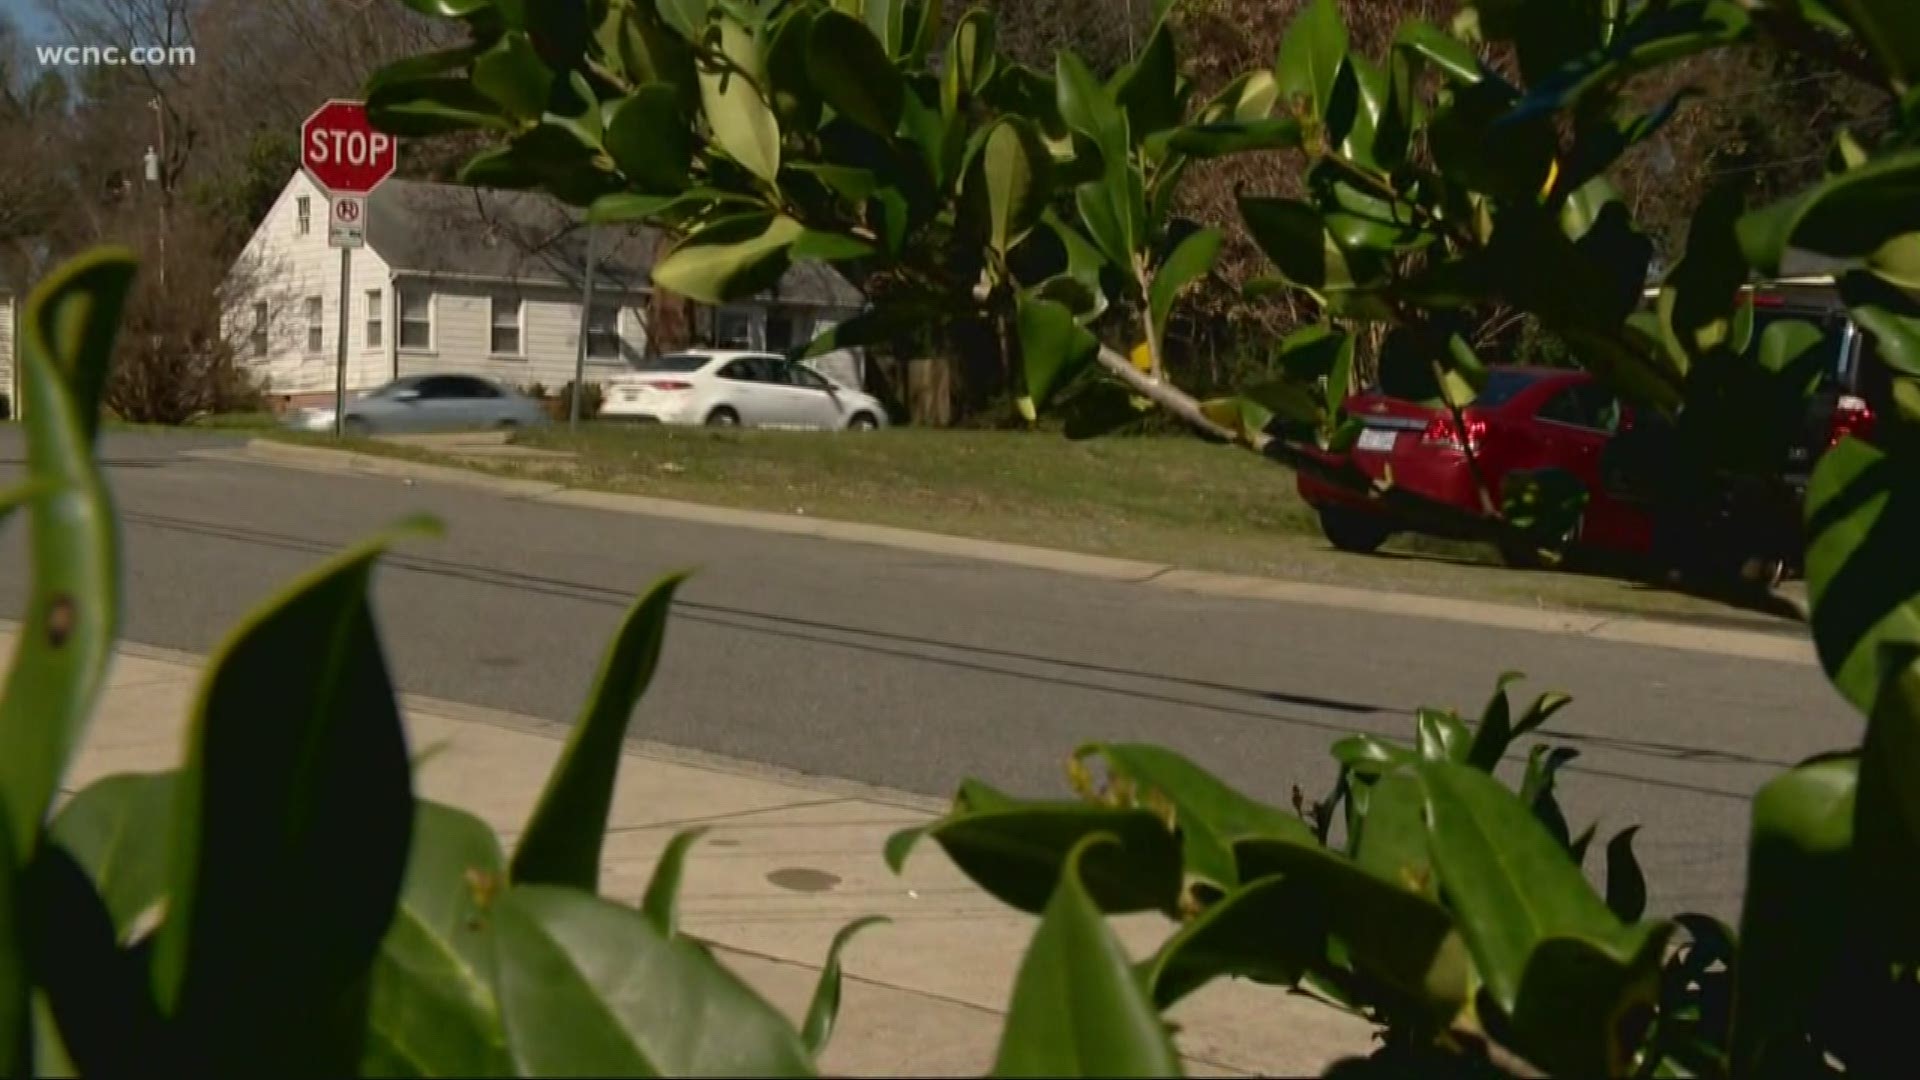 10-year-old boy tells police someone tried to abduct him Thursday as he got off the school bus.